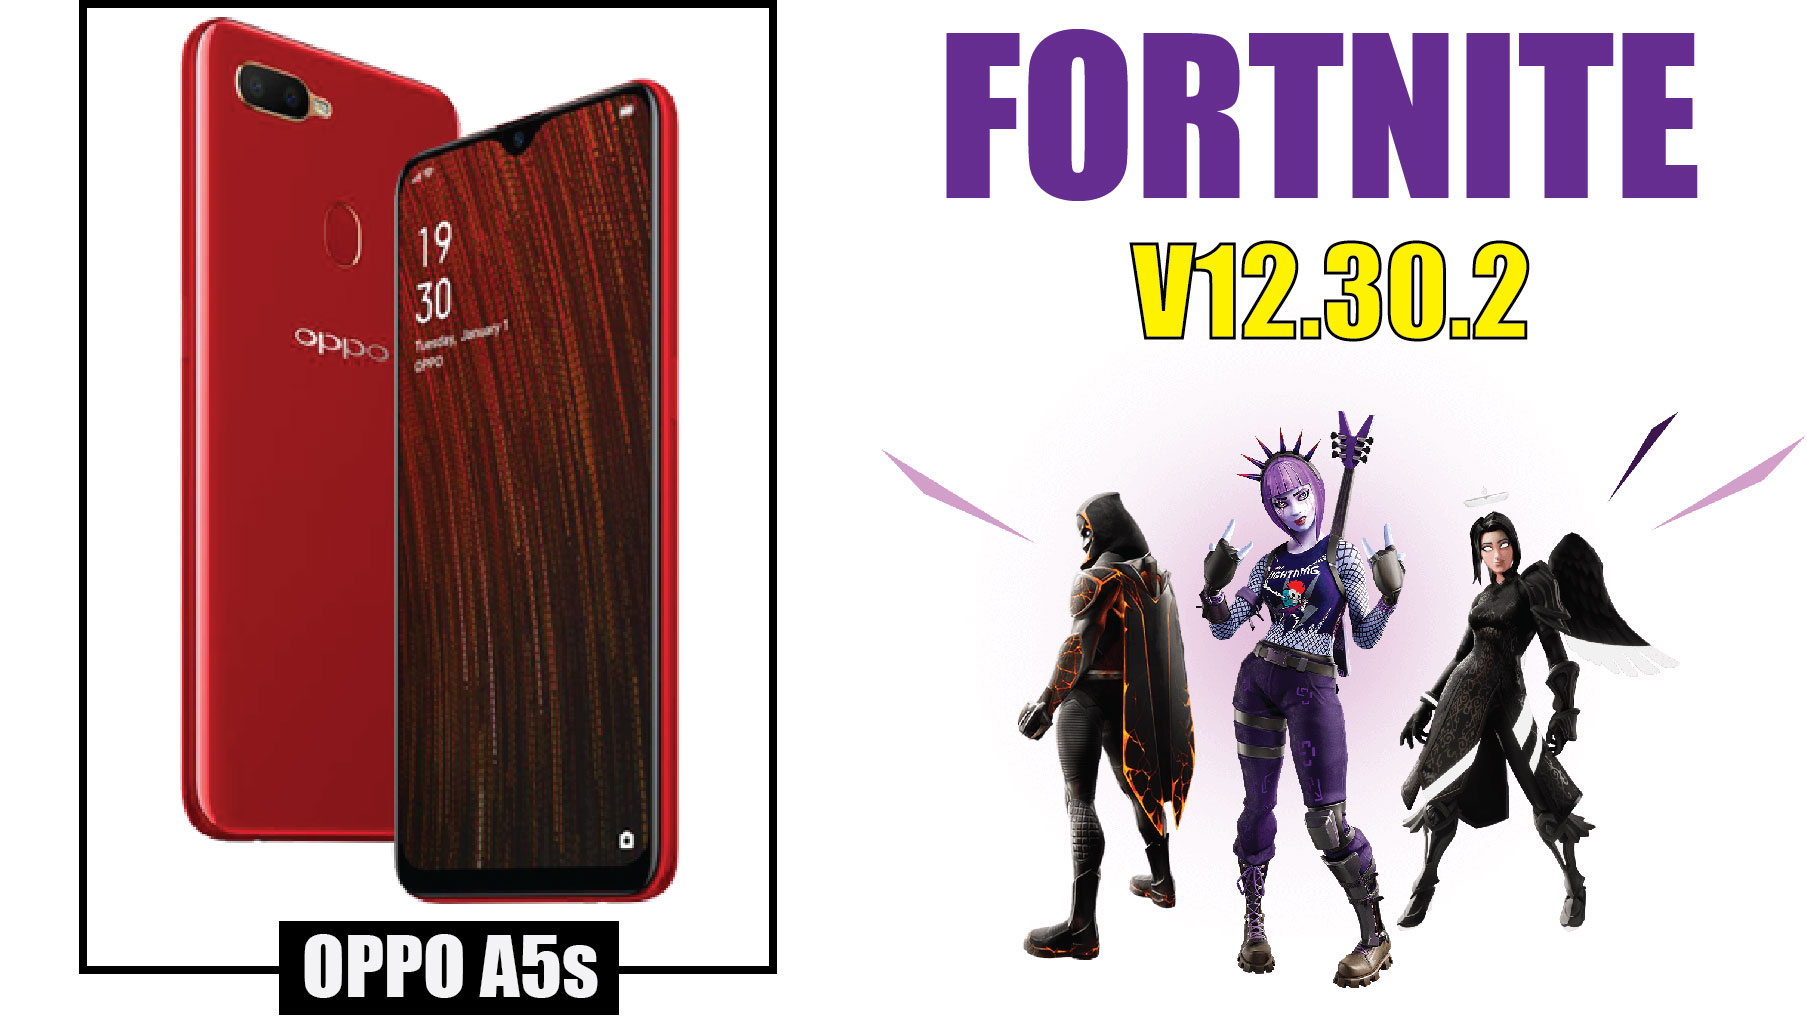 How To Install Fortnite Apk Fix Device Not Supported For ... - 1807 x 1023 jpeg 254kB